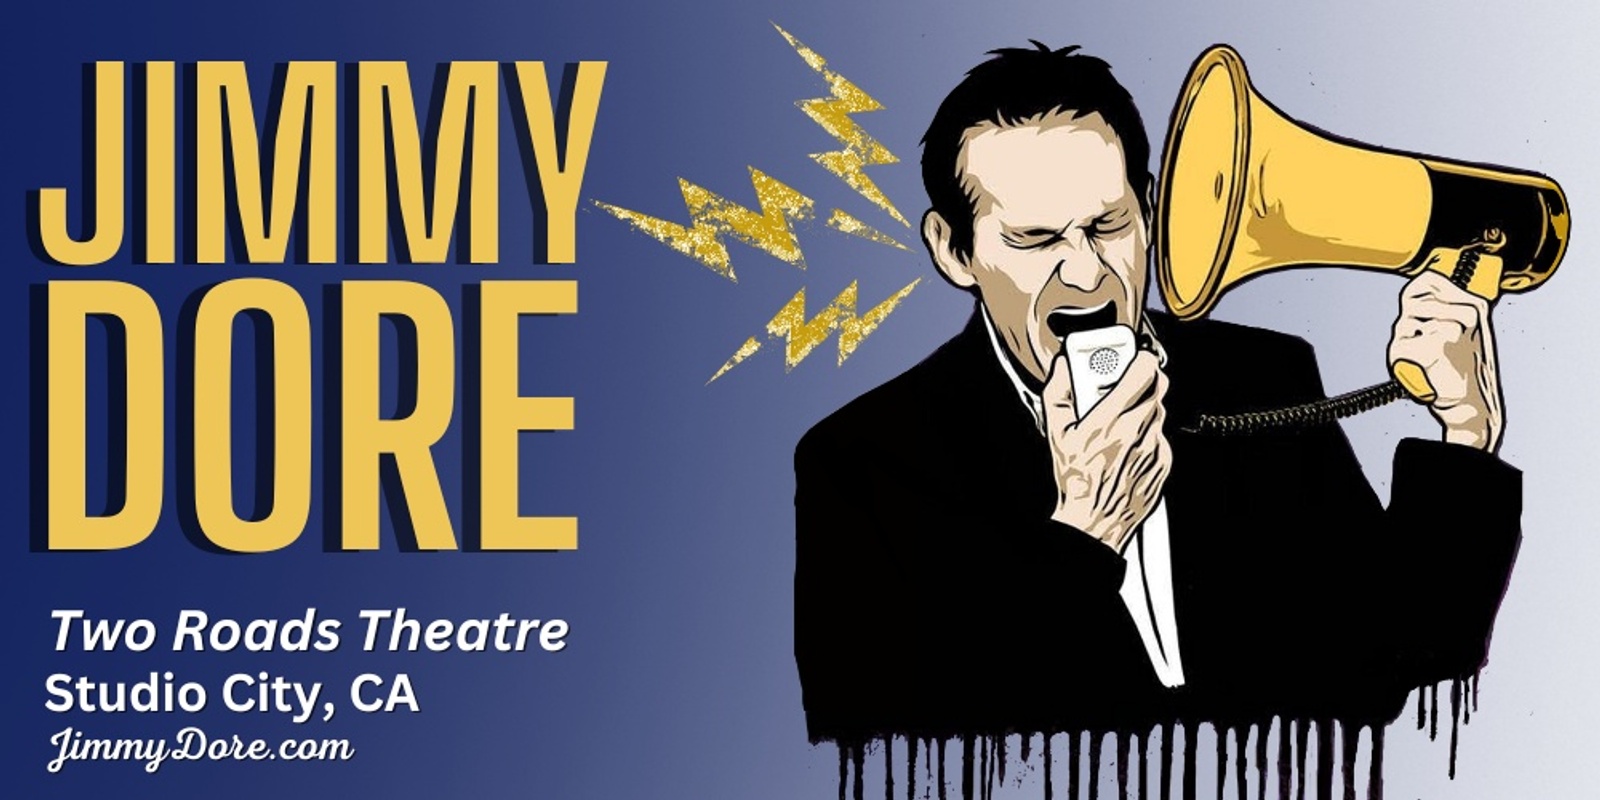 Banner image for Jimmy Dore